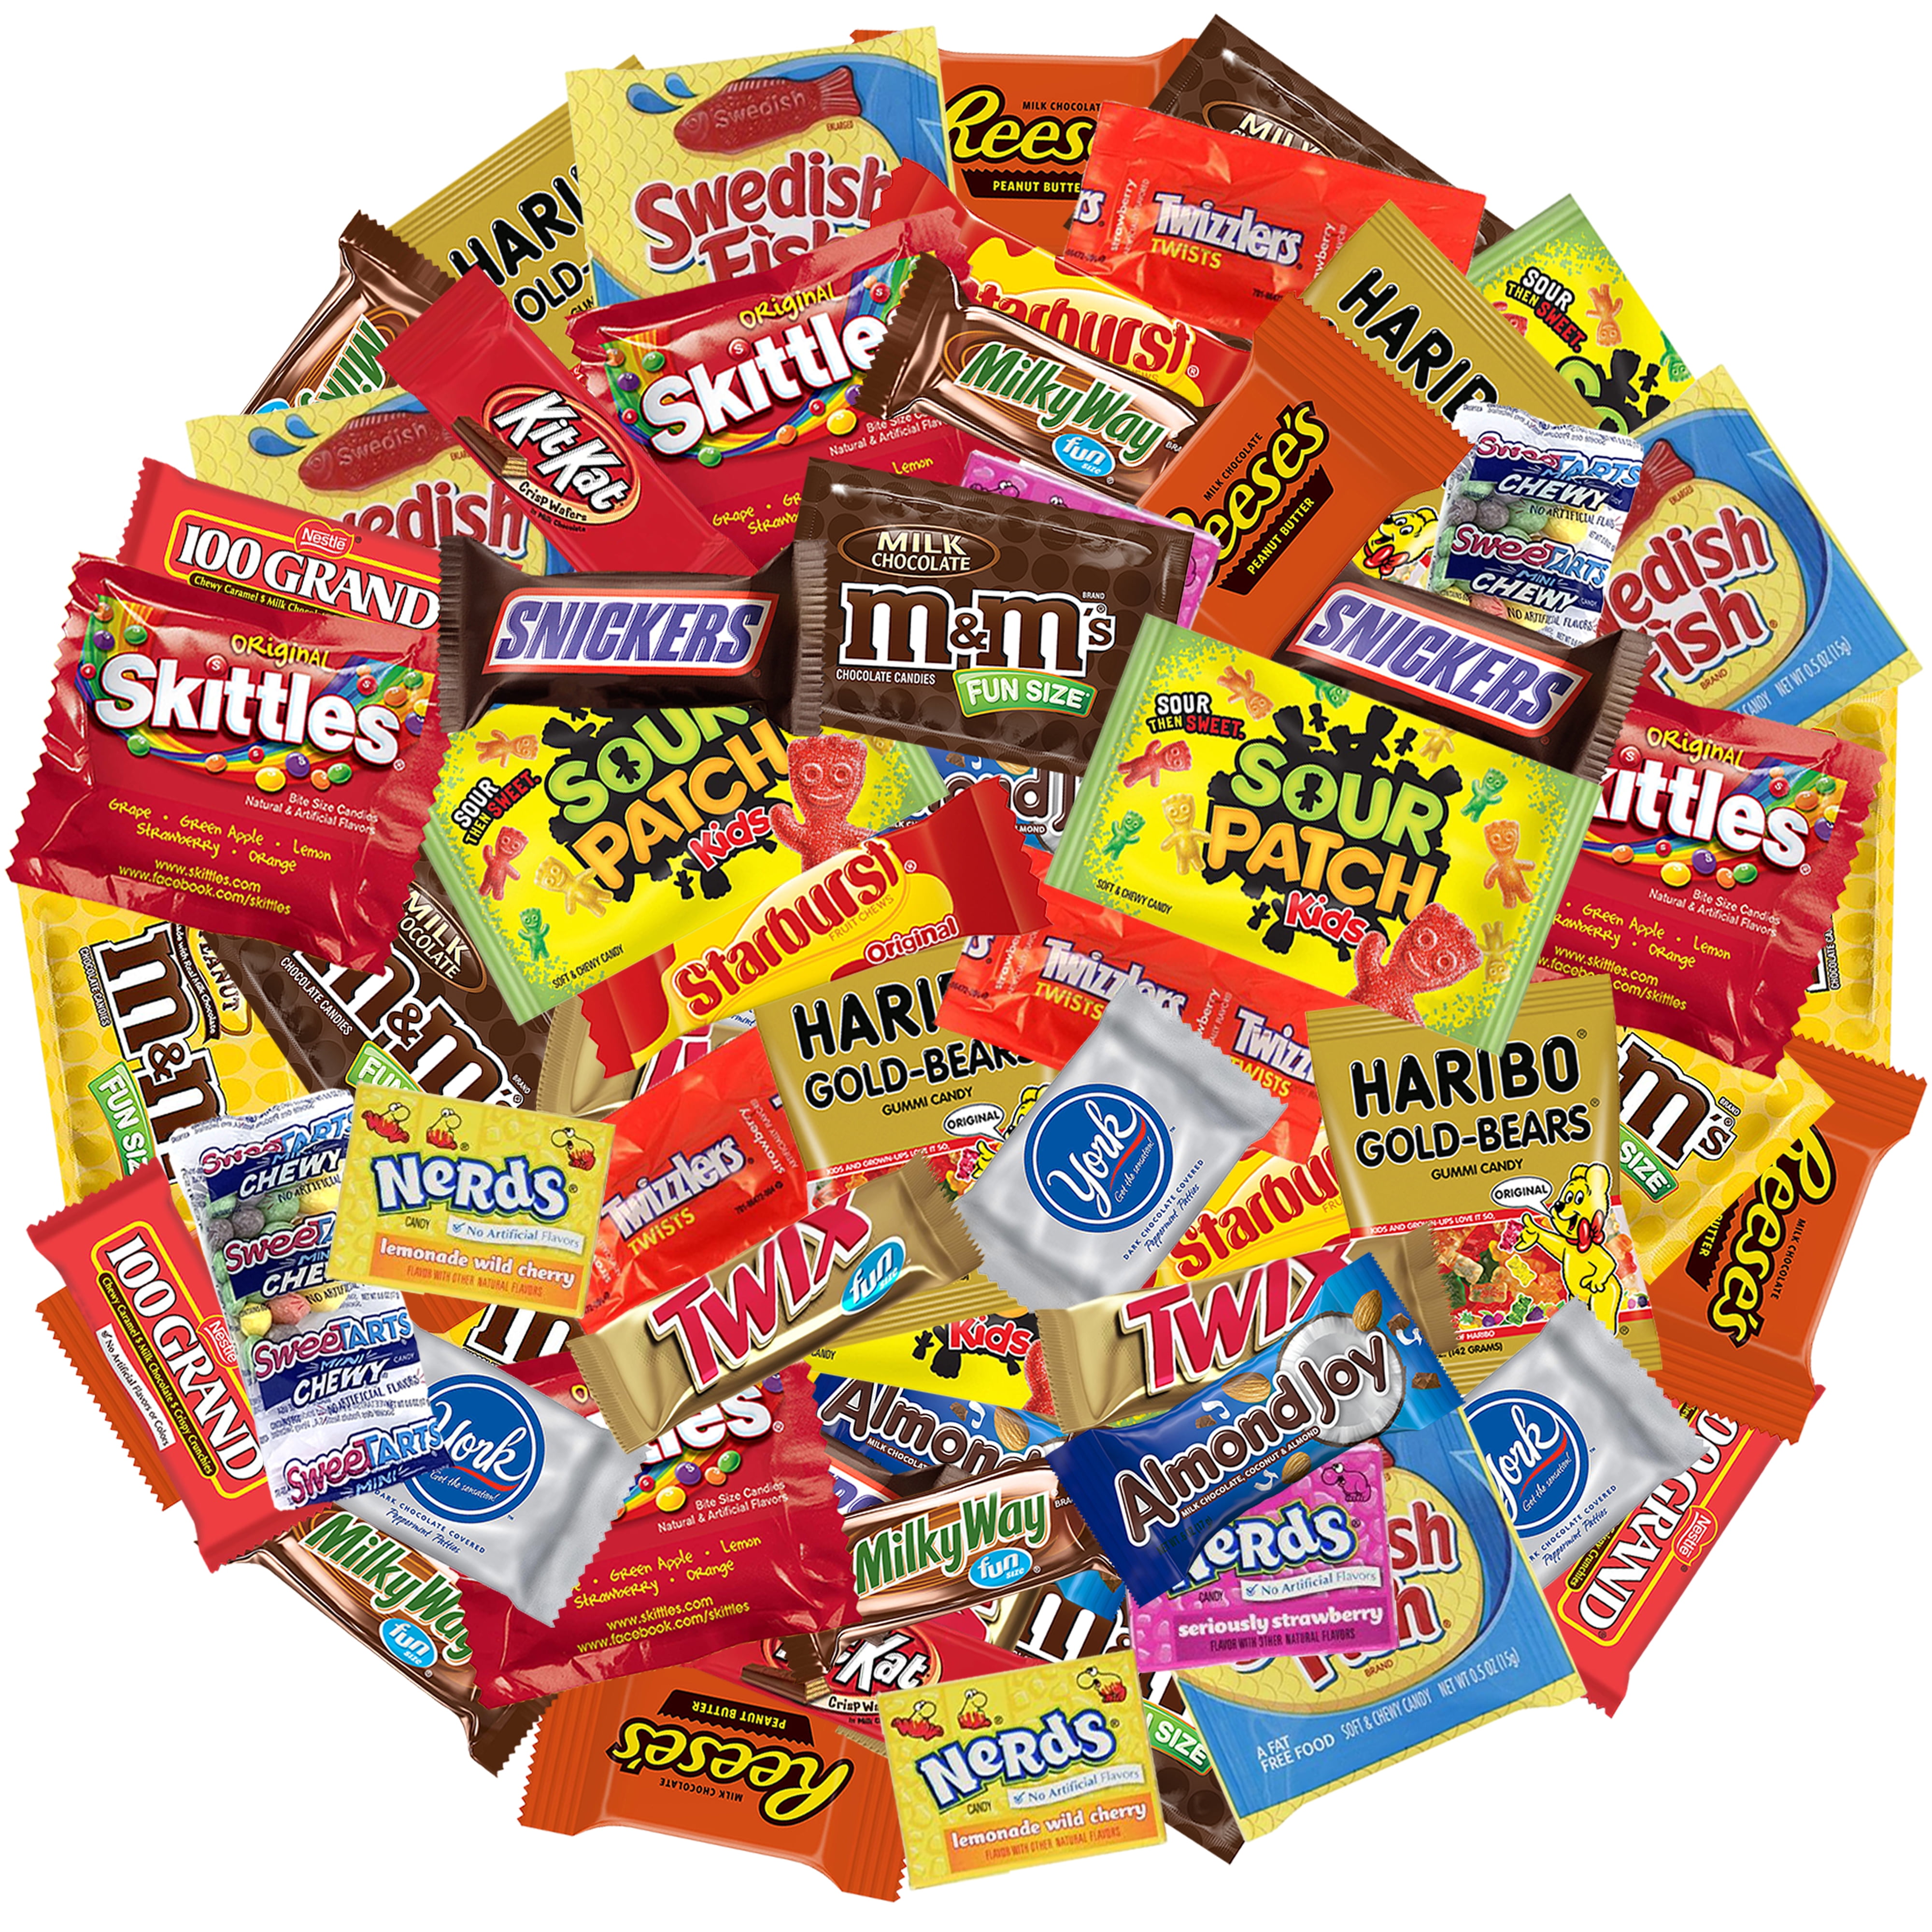 Candy and Chocolate Mix Variety Reeses, Snickers, York, Almond Joy, Kit Kat, 100 Twix, Milky Way, Sour Patch, Skittles, Twizzlers, Starburst, Swedish Fish, Haribo, and More (4 Pound) - Walmart.com